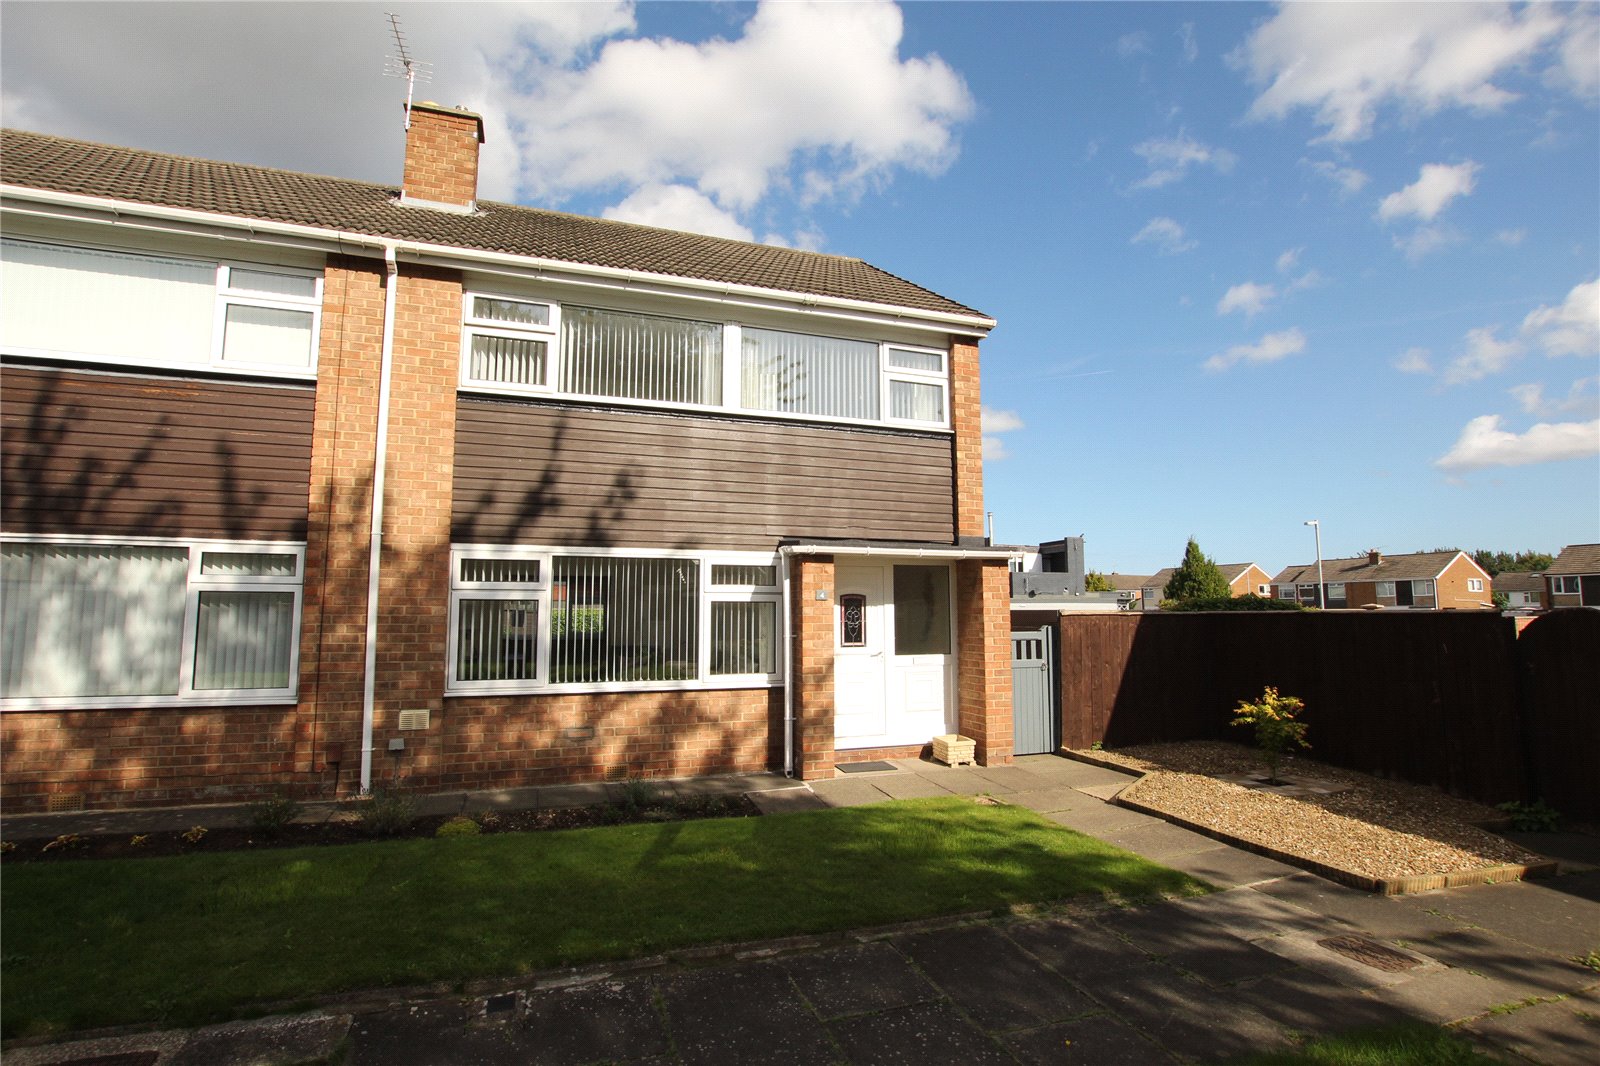 3 bed house for sale in Boltby Close, Acklam Hall 1